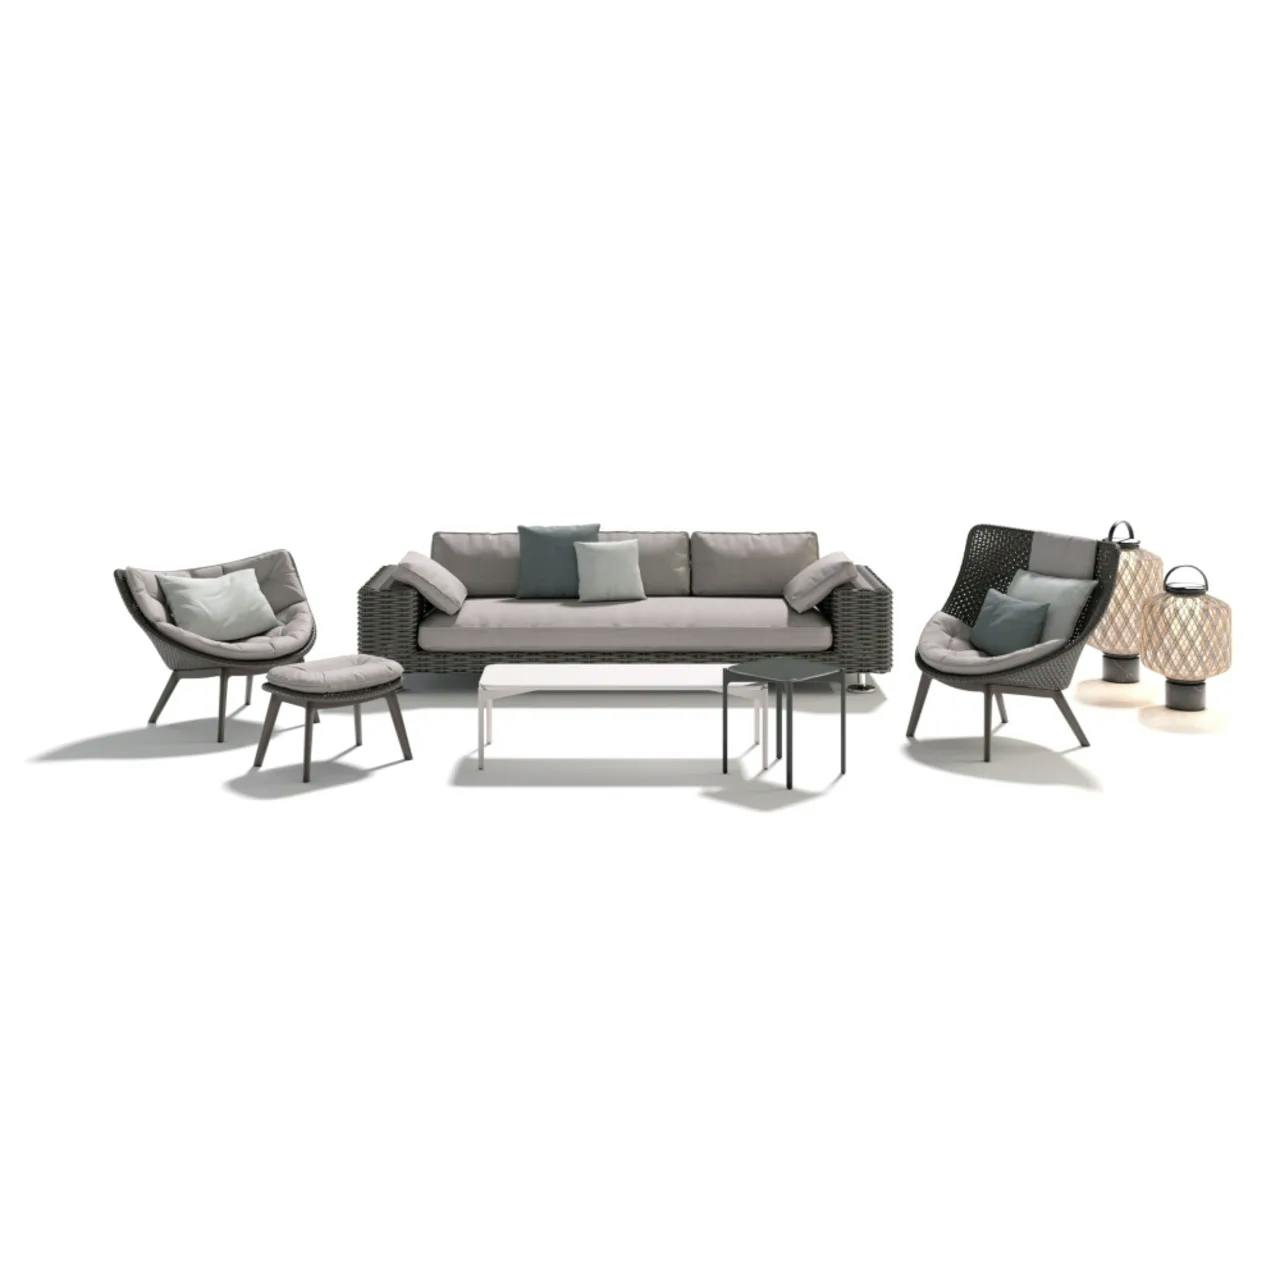 DEDON MBRACE Lounge Chair & Footstool | PAROS 3-Seater Sofa | IZON Coffee Tables | MBRACE Wing Chair | THE OTHERS Lanterns